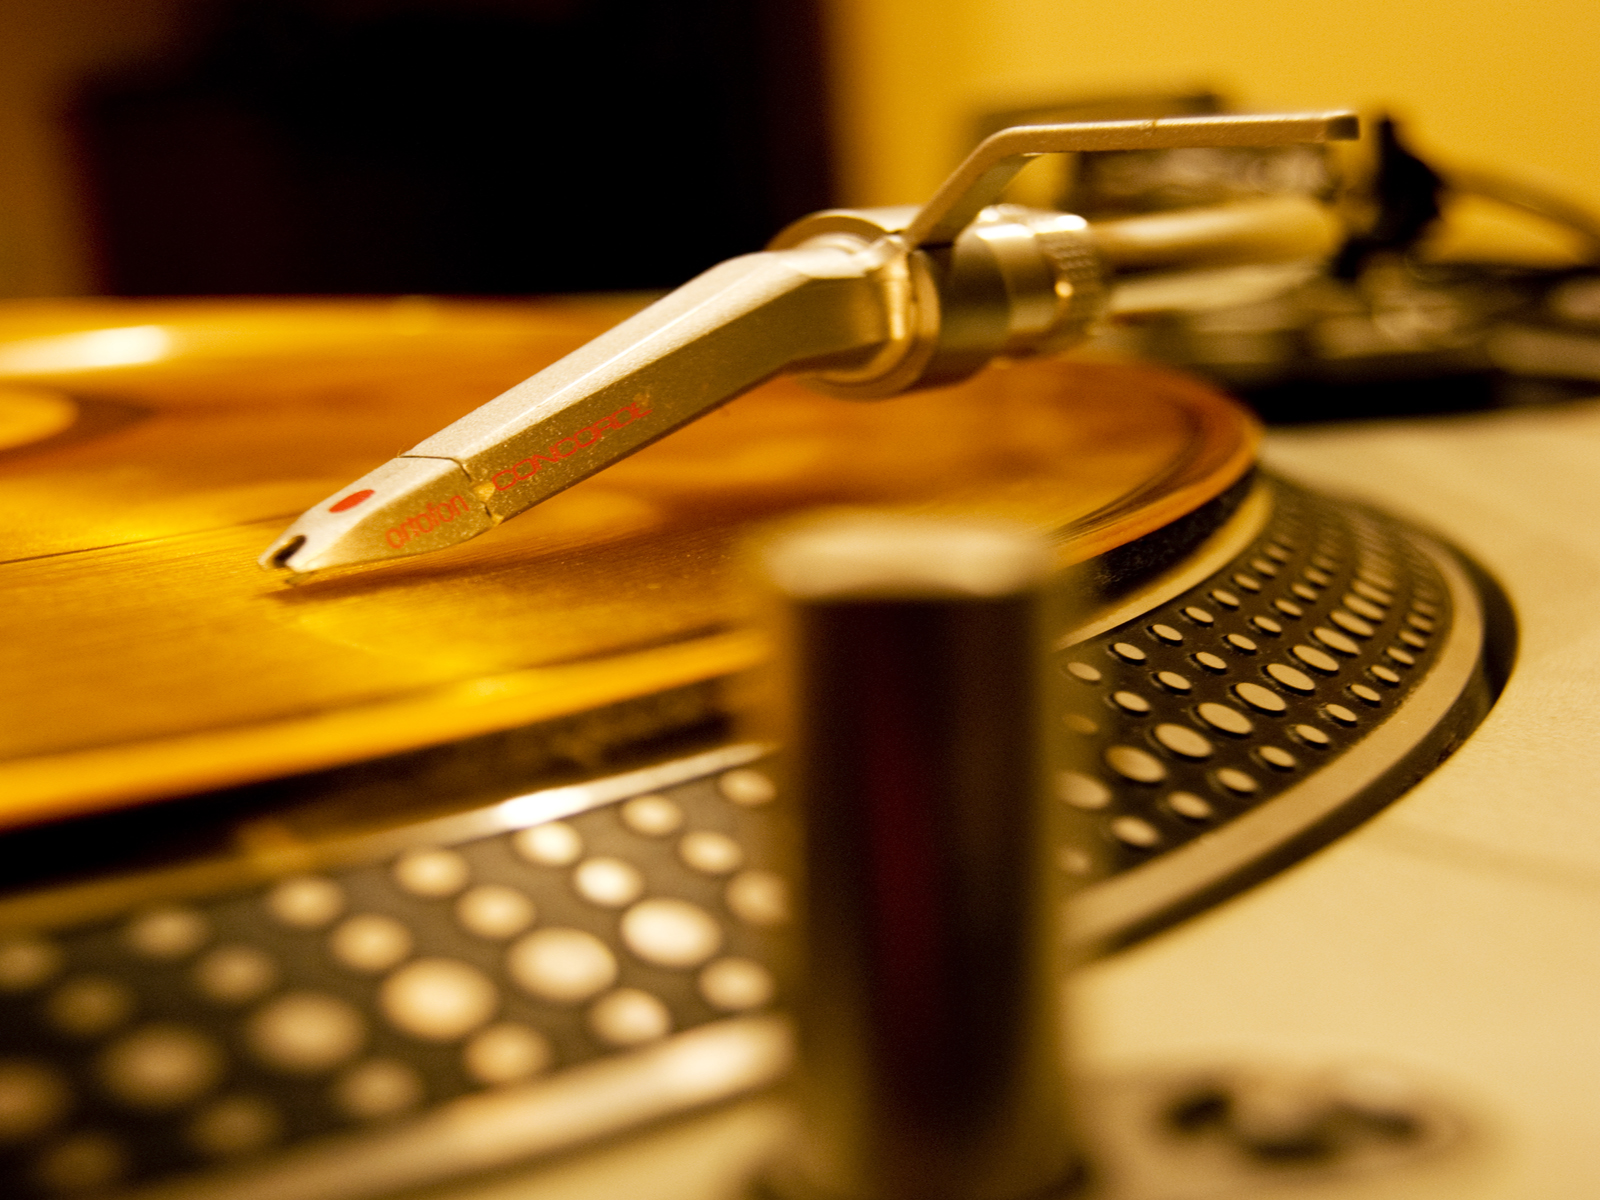 Technics Turntable Another Look World Wallpaper Collection